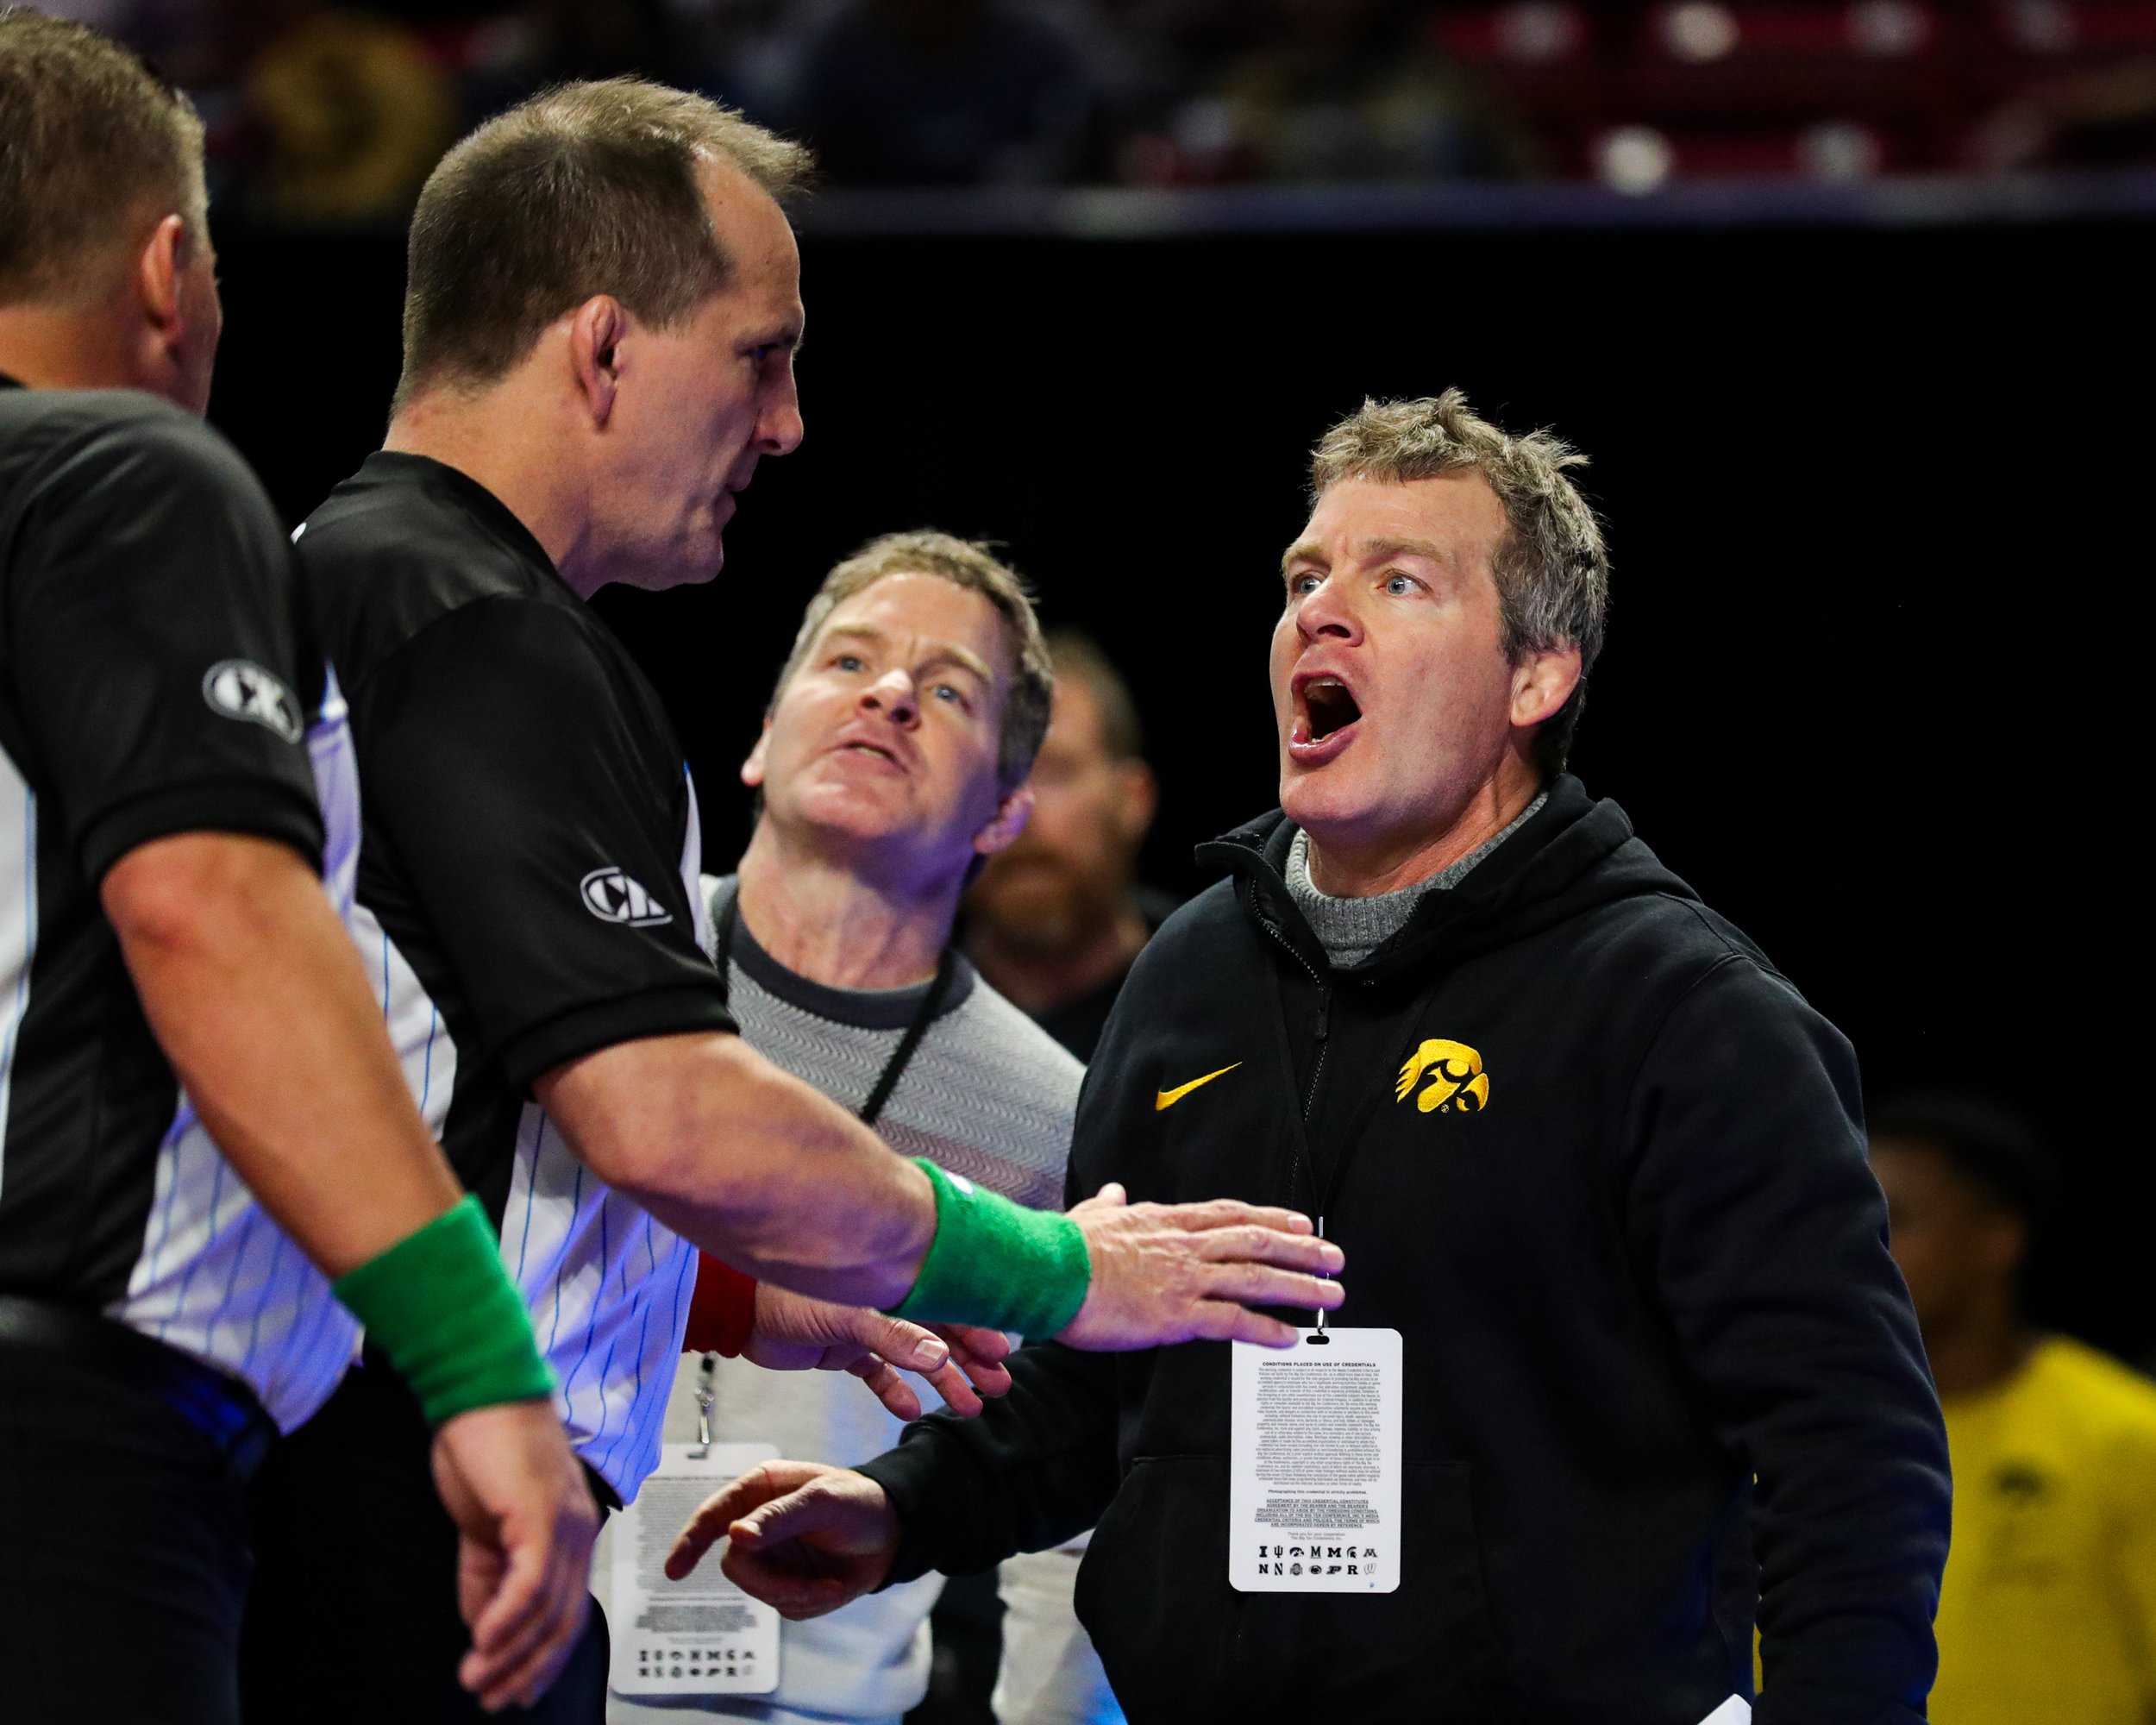  Iowa wrestling coach Tom Brands yells at officials during a 133-lb semifinal consolation match during the Big Ten Wrestling Championships at the Xfinity Center in College Park, Maryland on Sunday March 10, 2023. (David Harmantas/For the Gazette) 